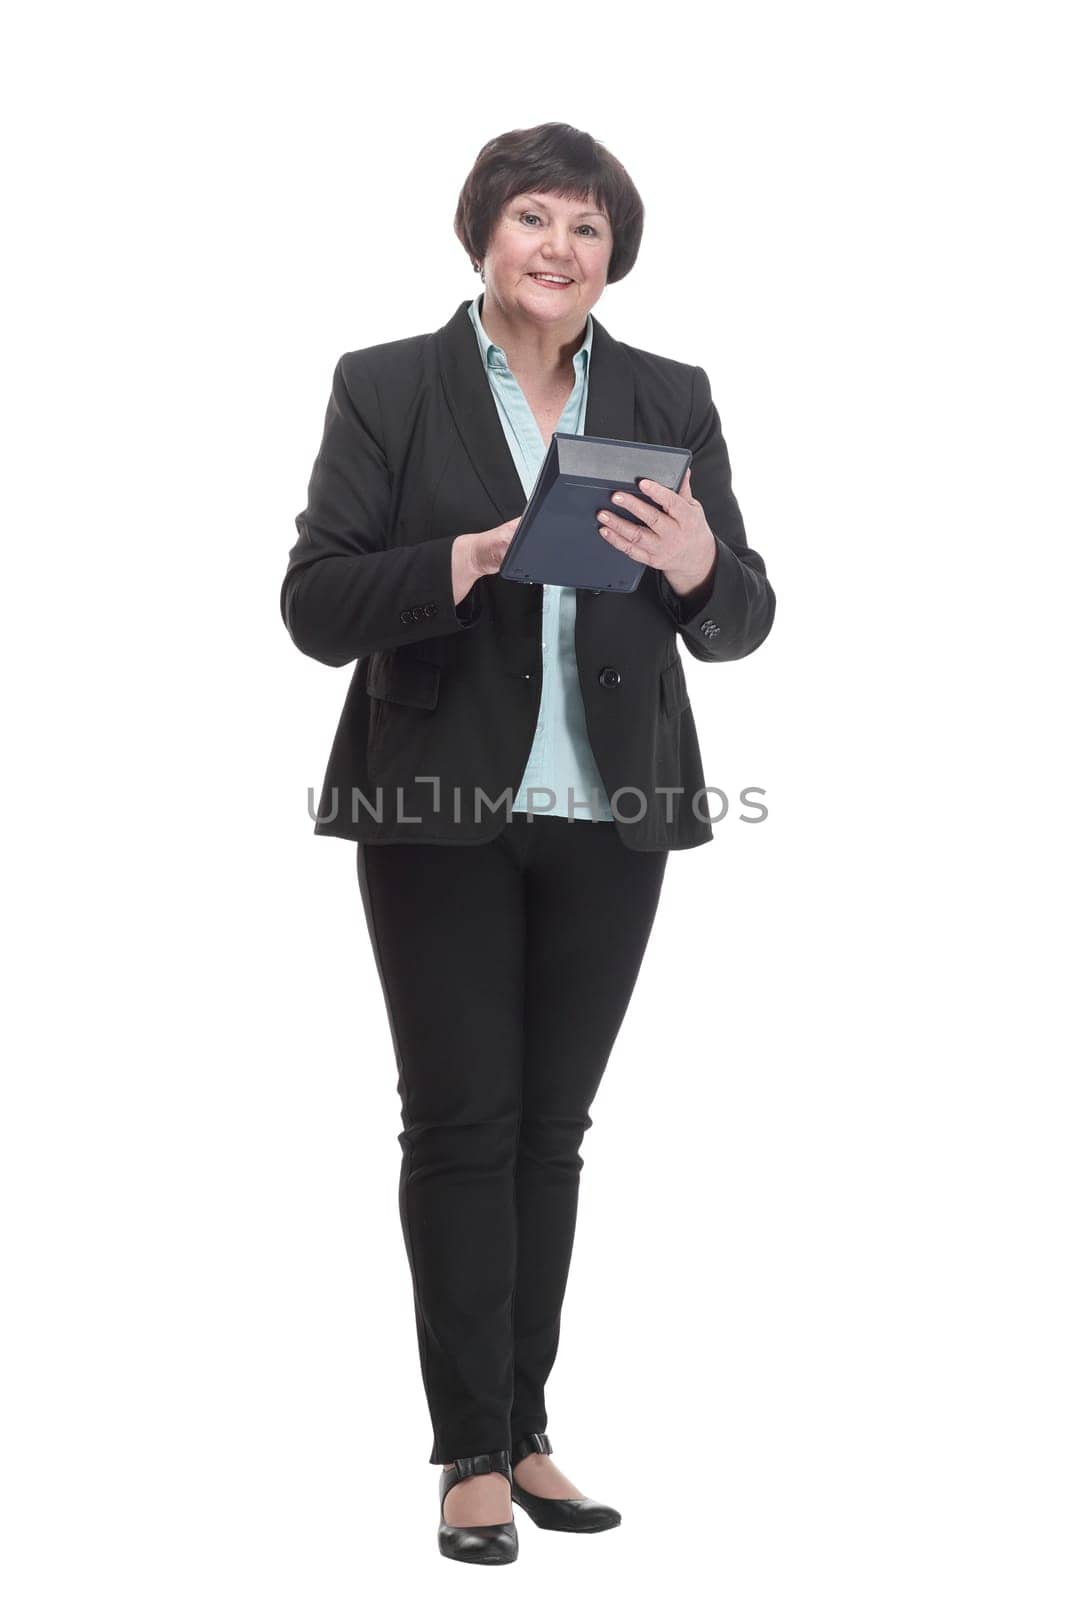 in full growth.smiling business woman with a calculator. isolated on a white background.